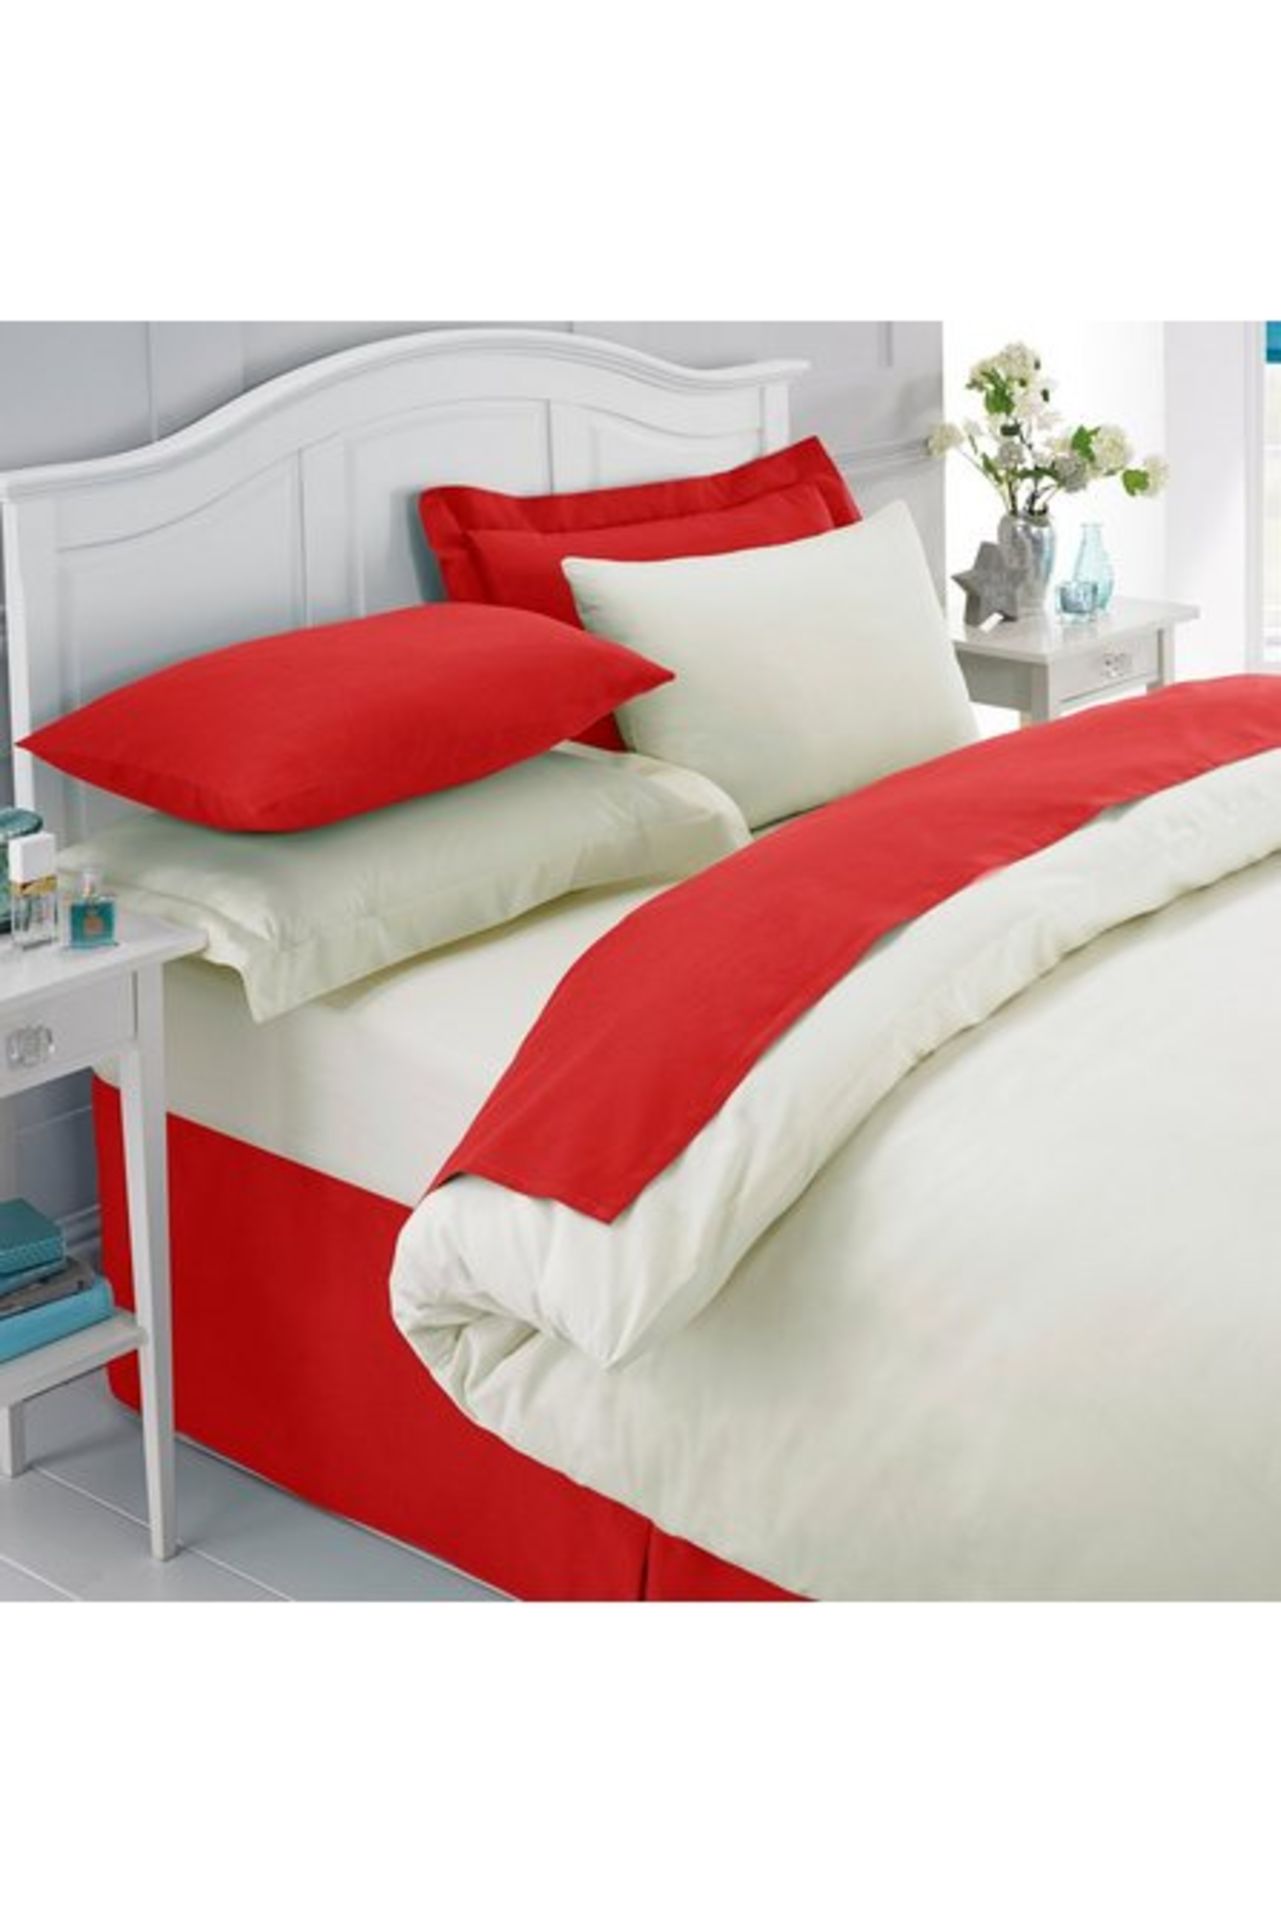 1 BAGGED PERCALE PLAIN DYED FLAT SHEET IN RED / RRP £33.49 (PUBLIC VIEWING AVAILABLE)